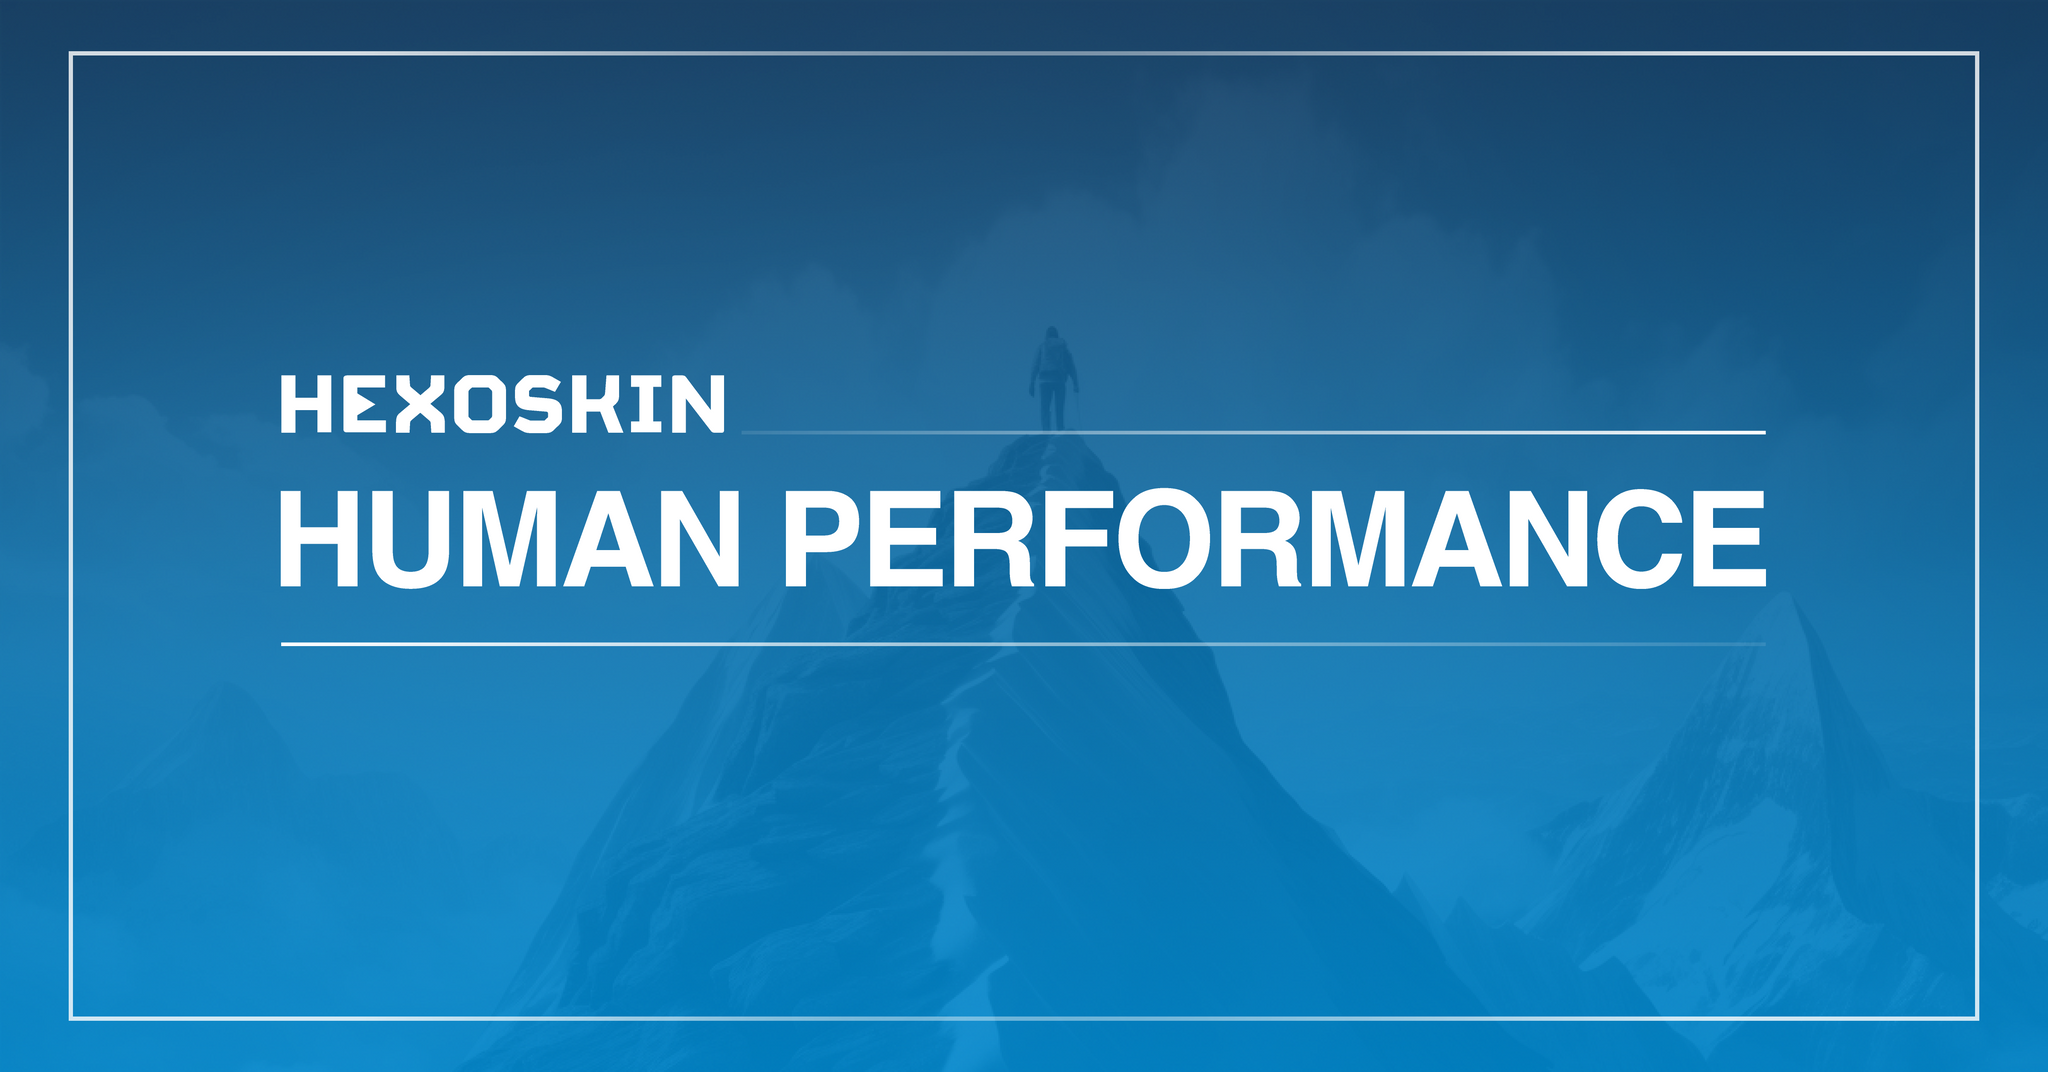 Human Performance Research with Hexoskin & Astroskin - Academic Research - Millitary - Defense - Defense - Pilot - Navy - Army - Stress Monitoring - Fatigue & Sleep Tracking